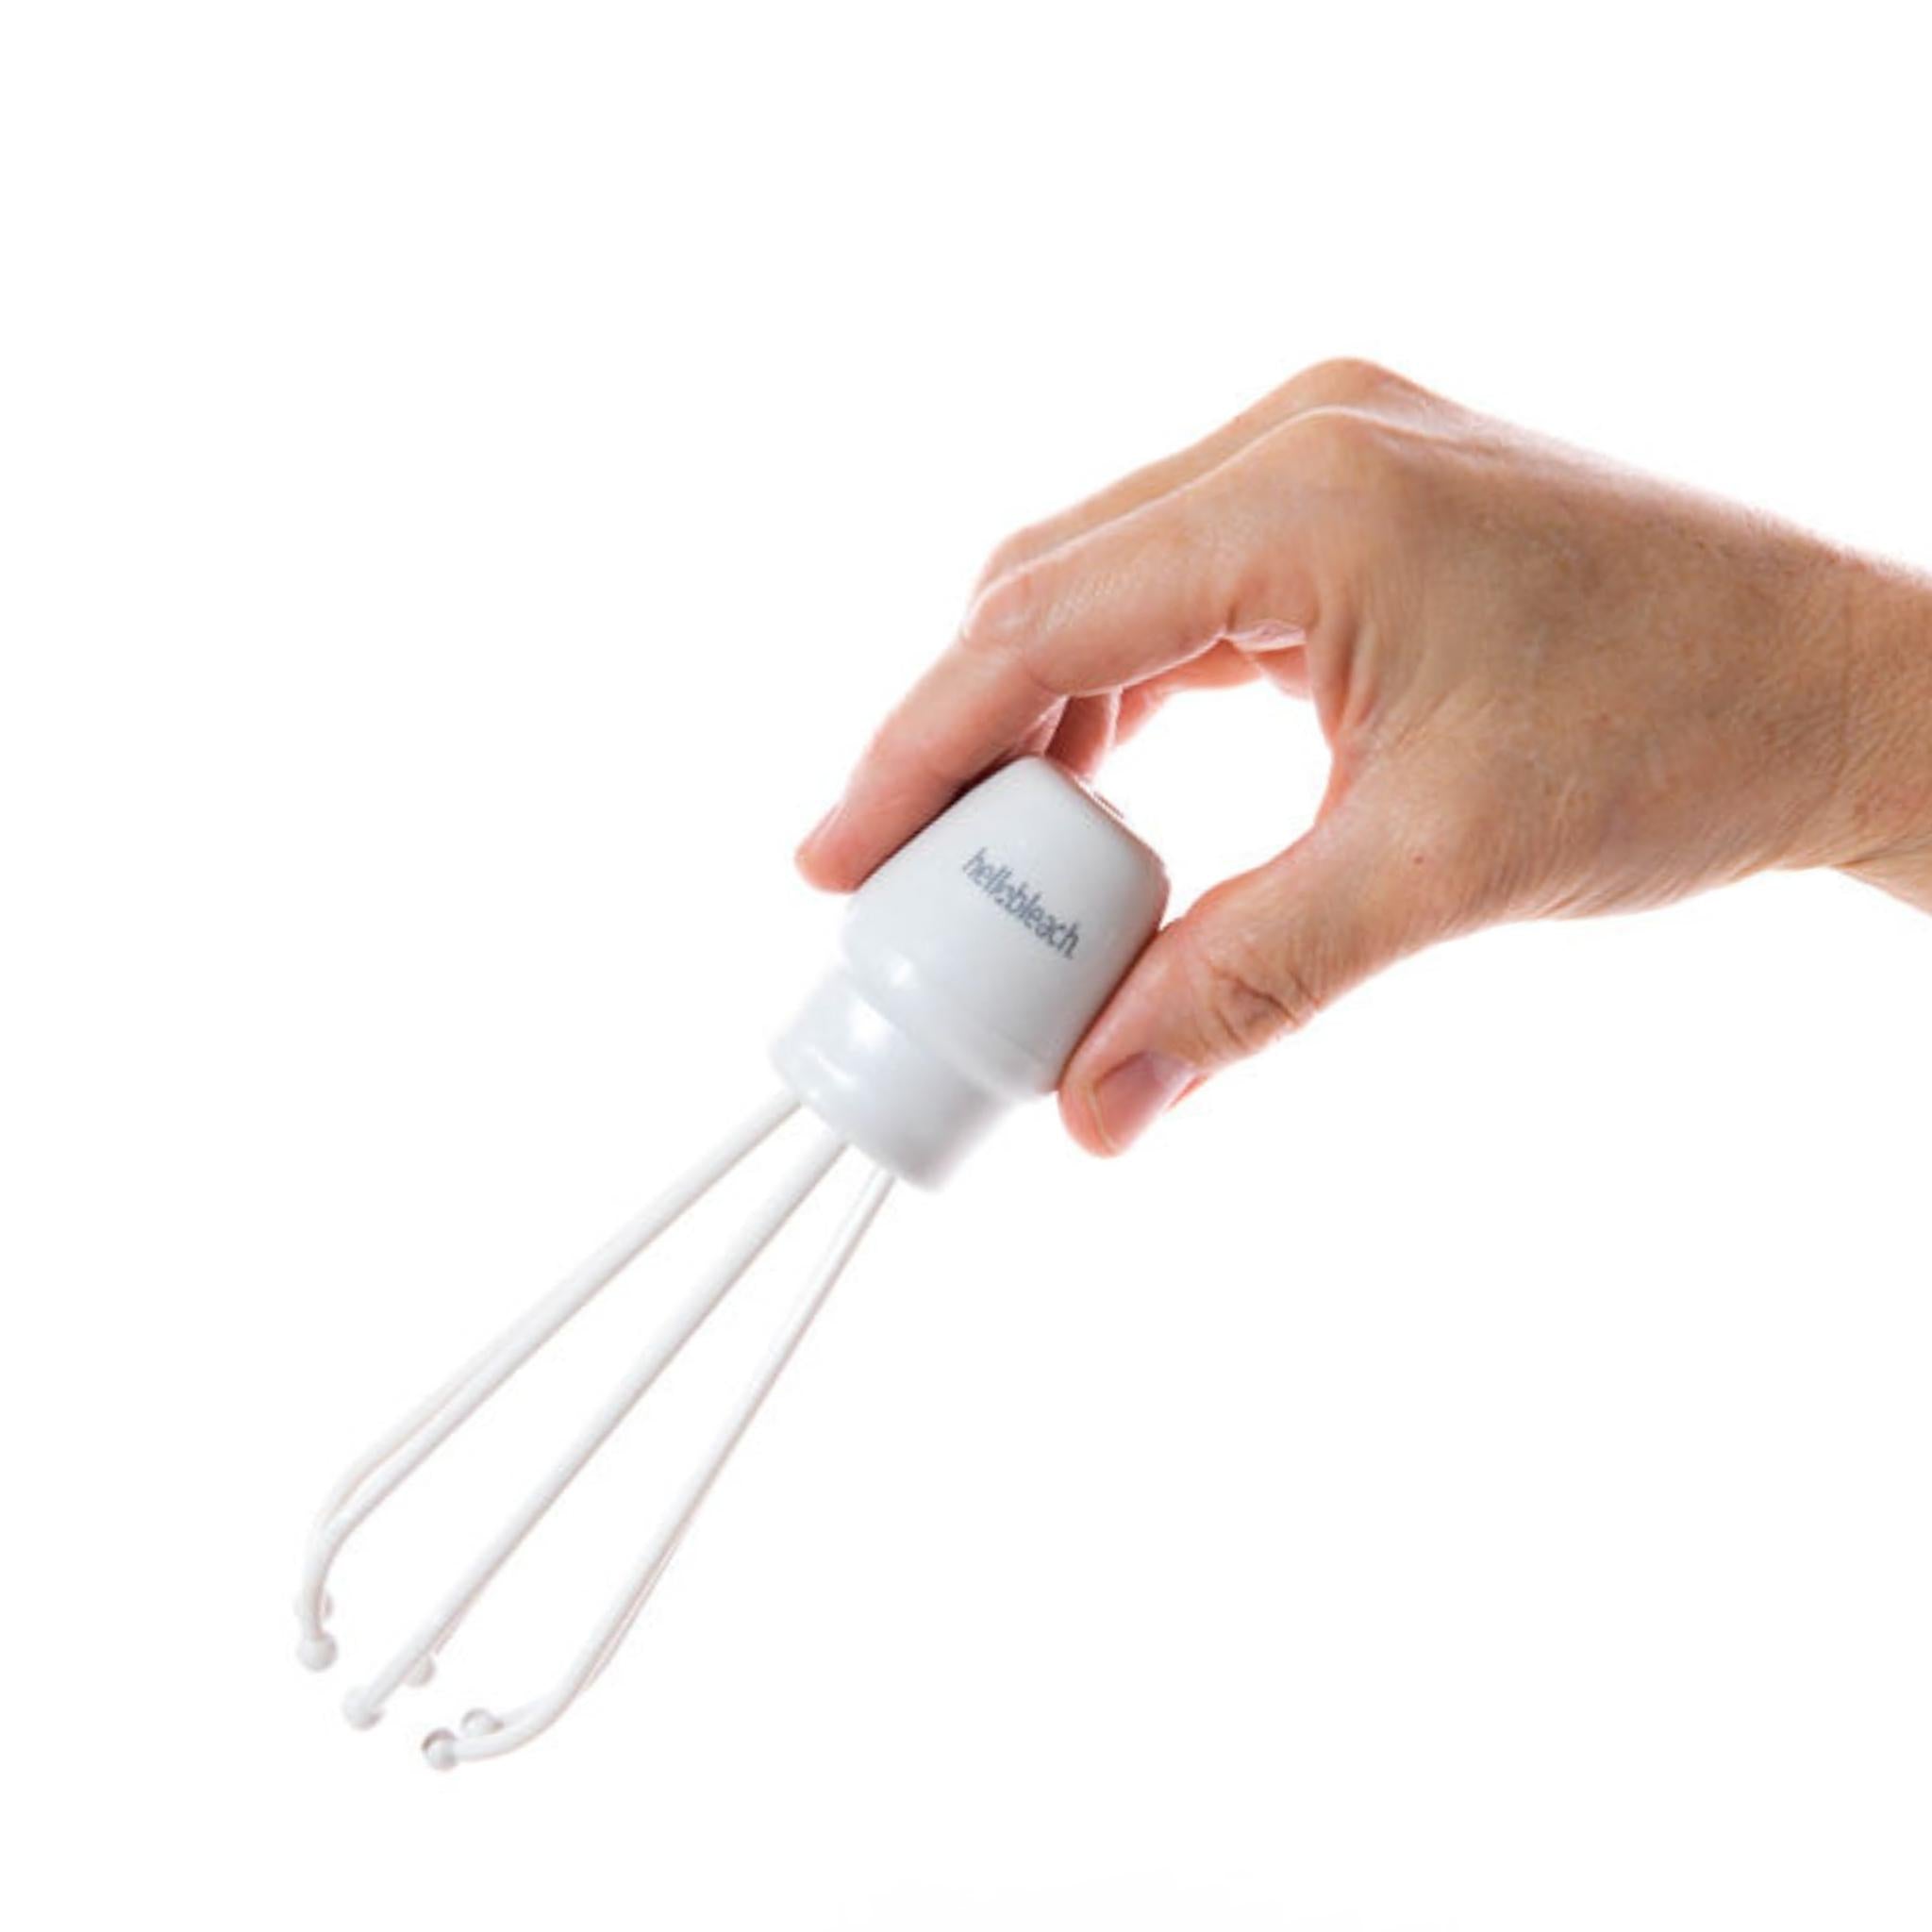 TINT WHISK MADE FROM RECYCLED PLASTICS